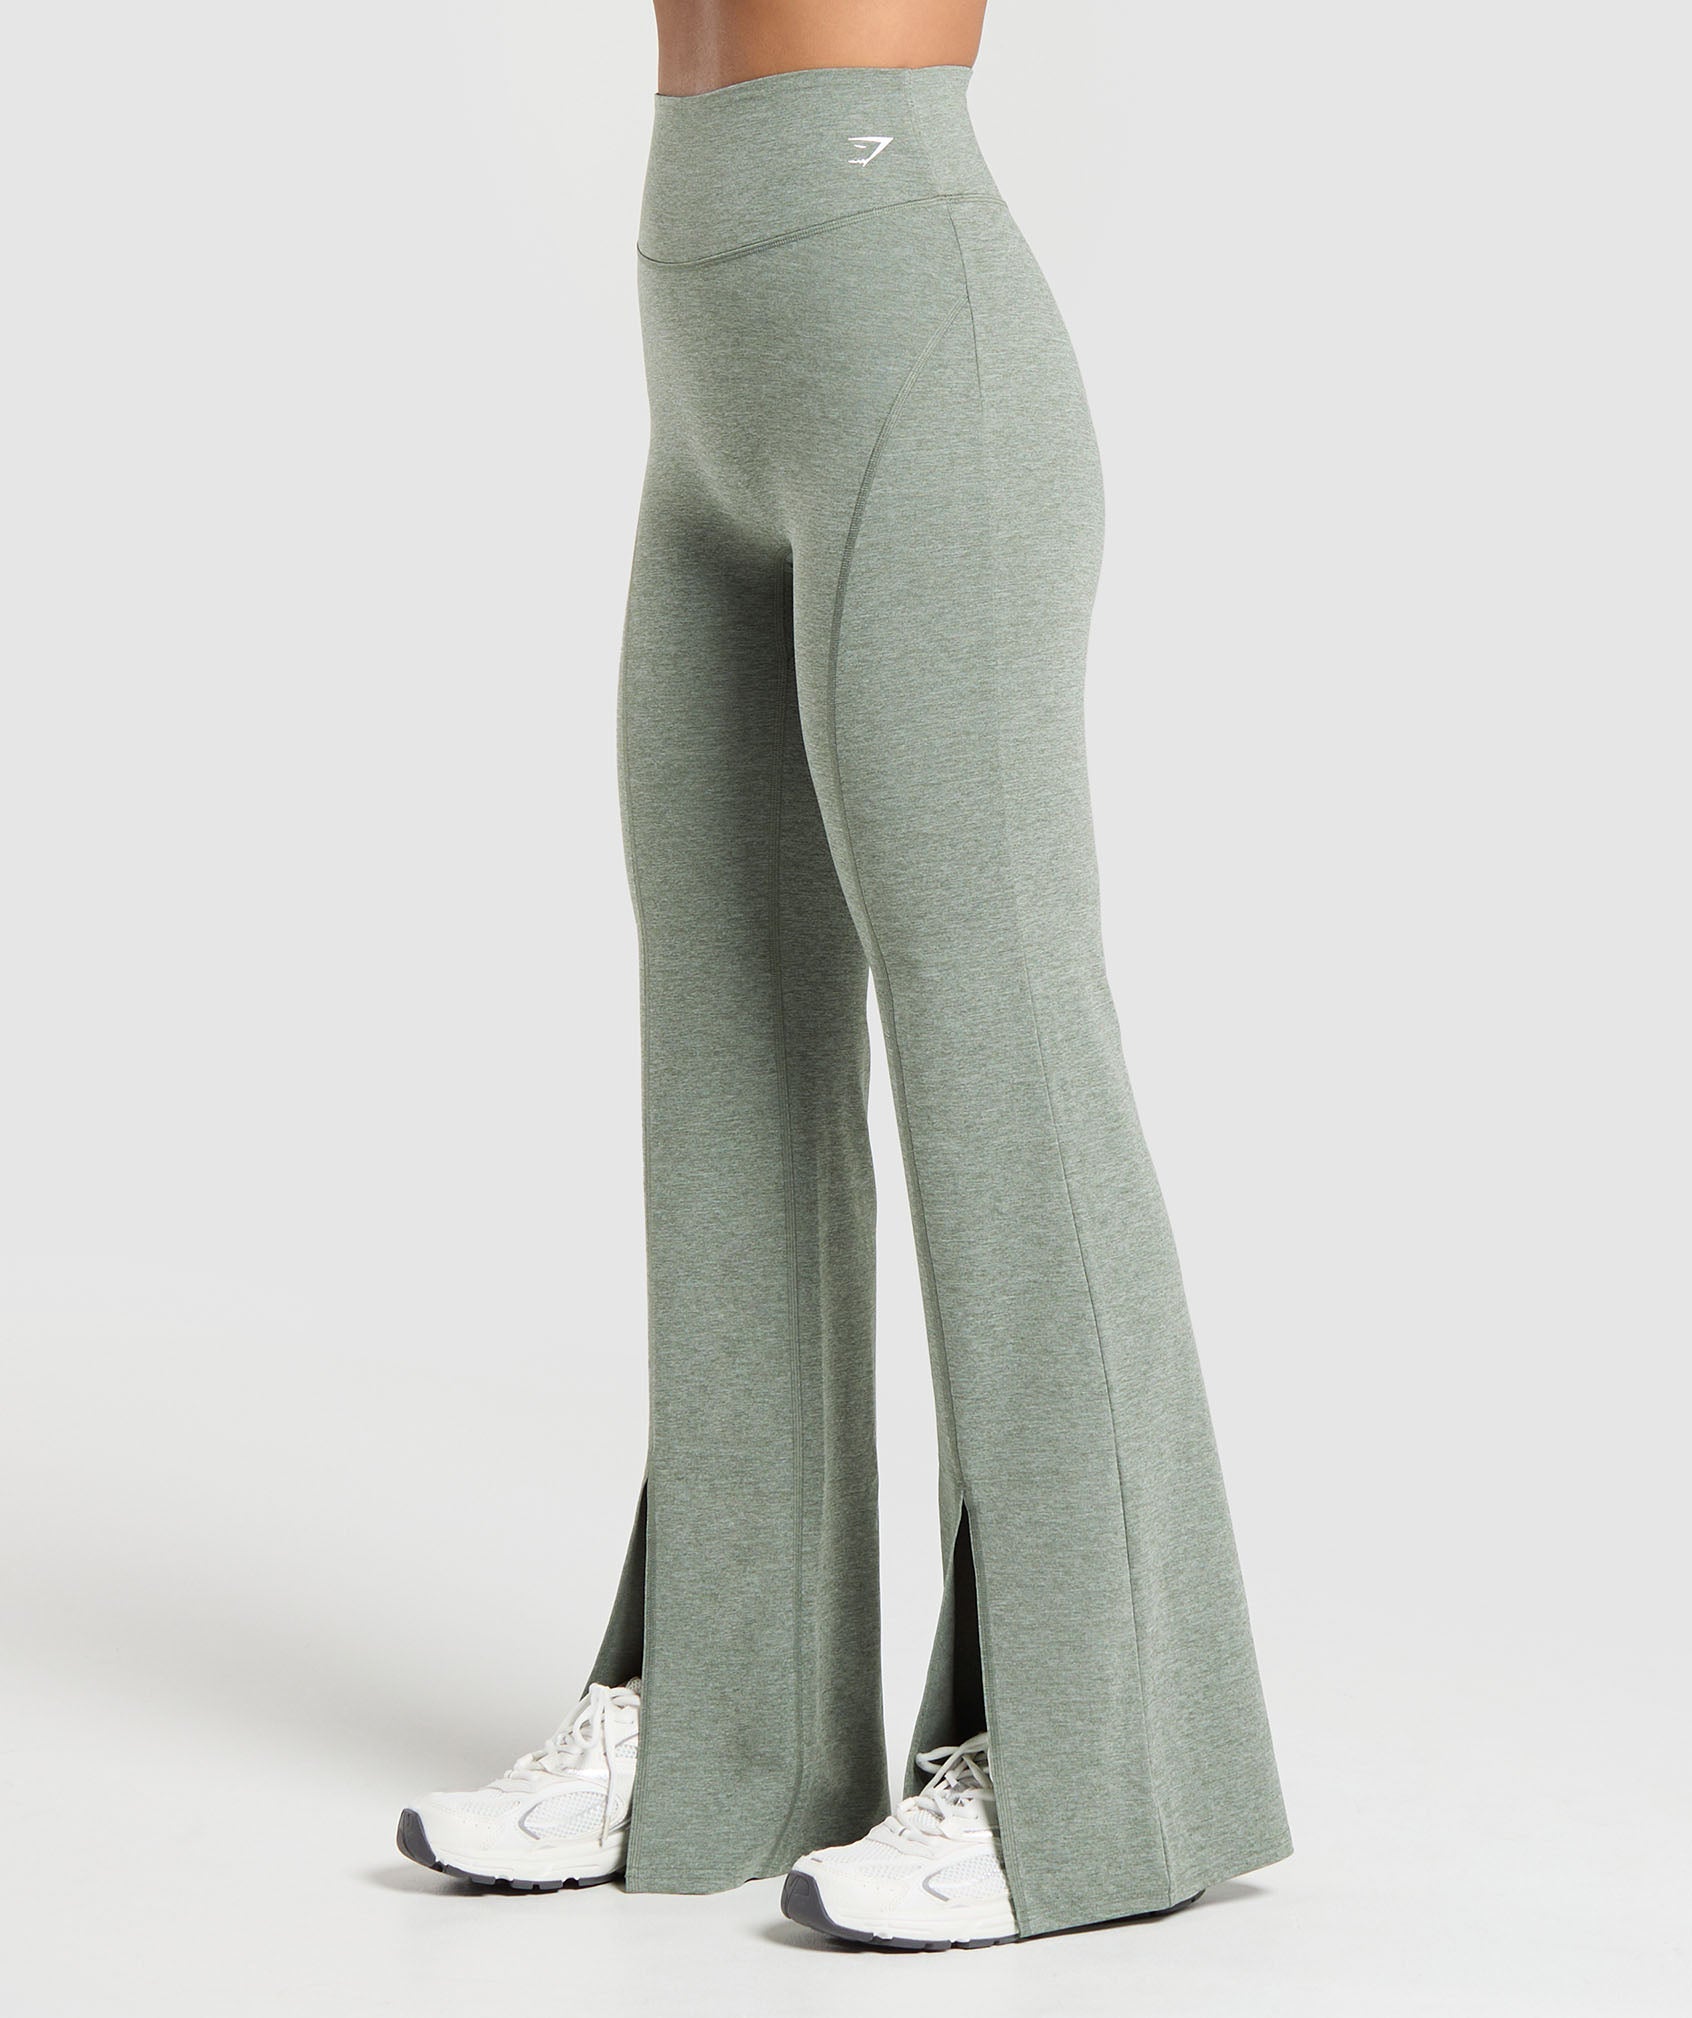 Marl Flared Leggings in Unit Green - view 3